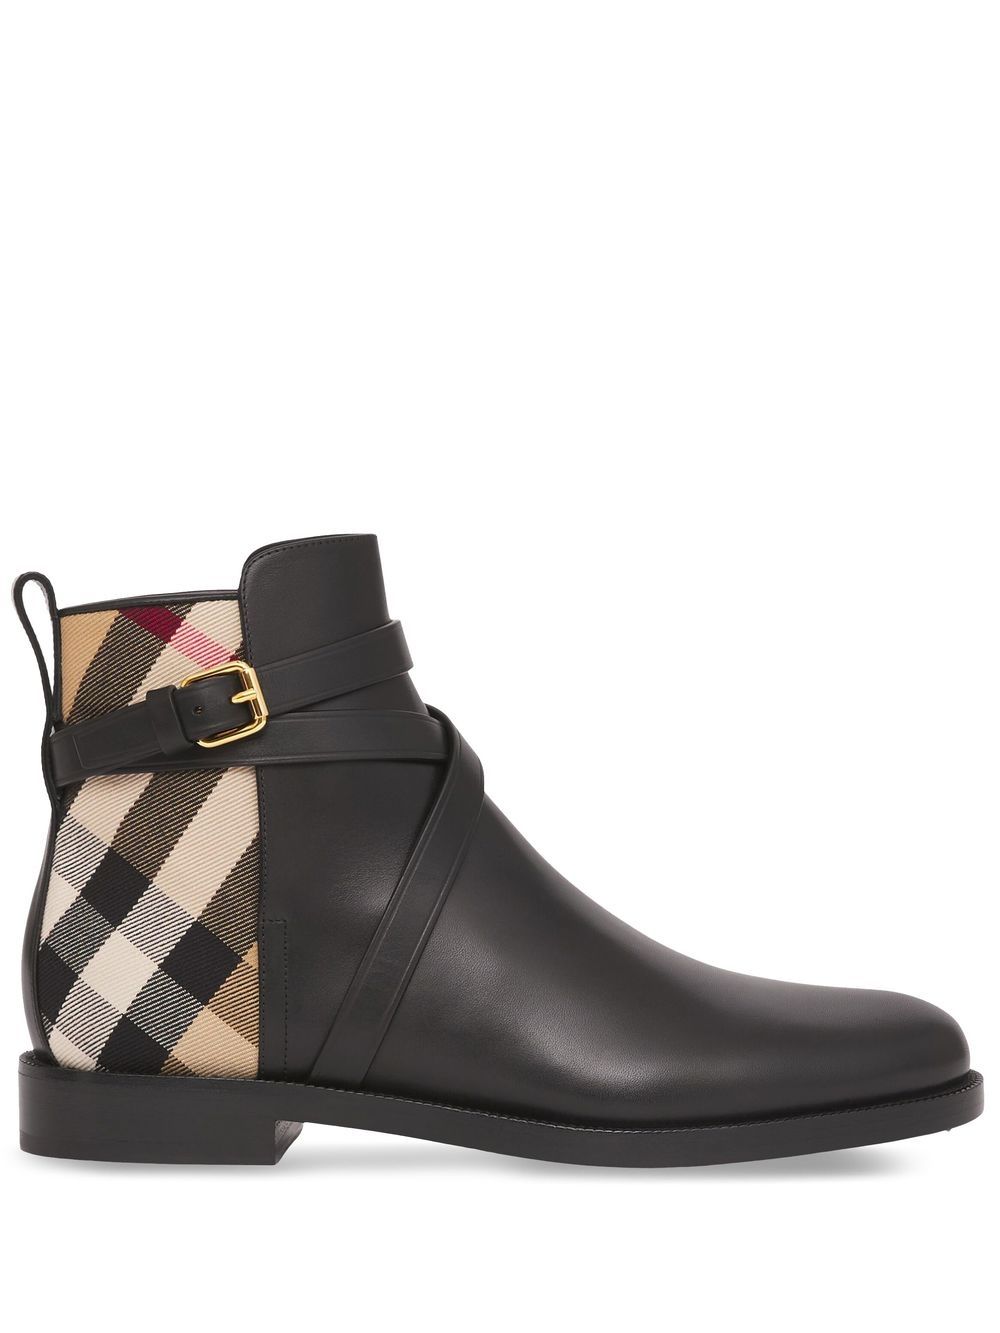 Burberry House Check leather ankle boots - Black von Burberry